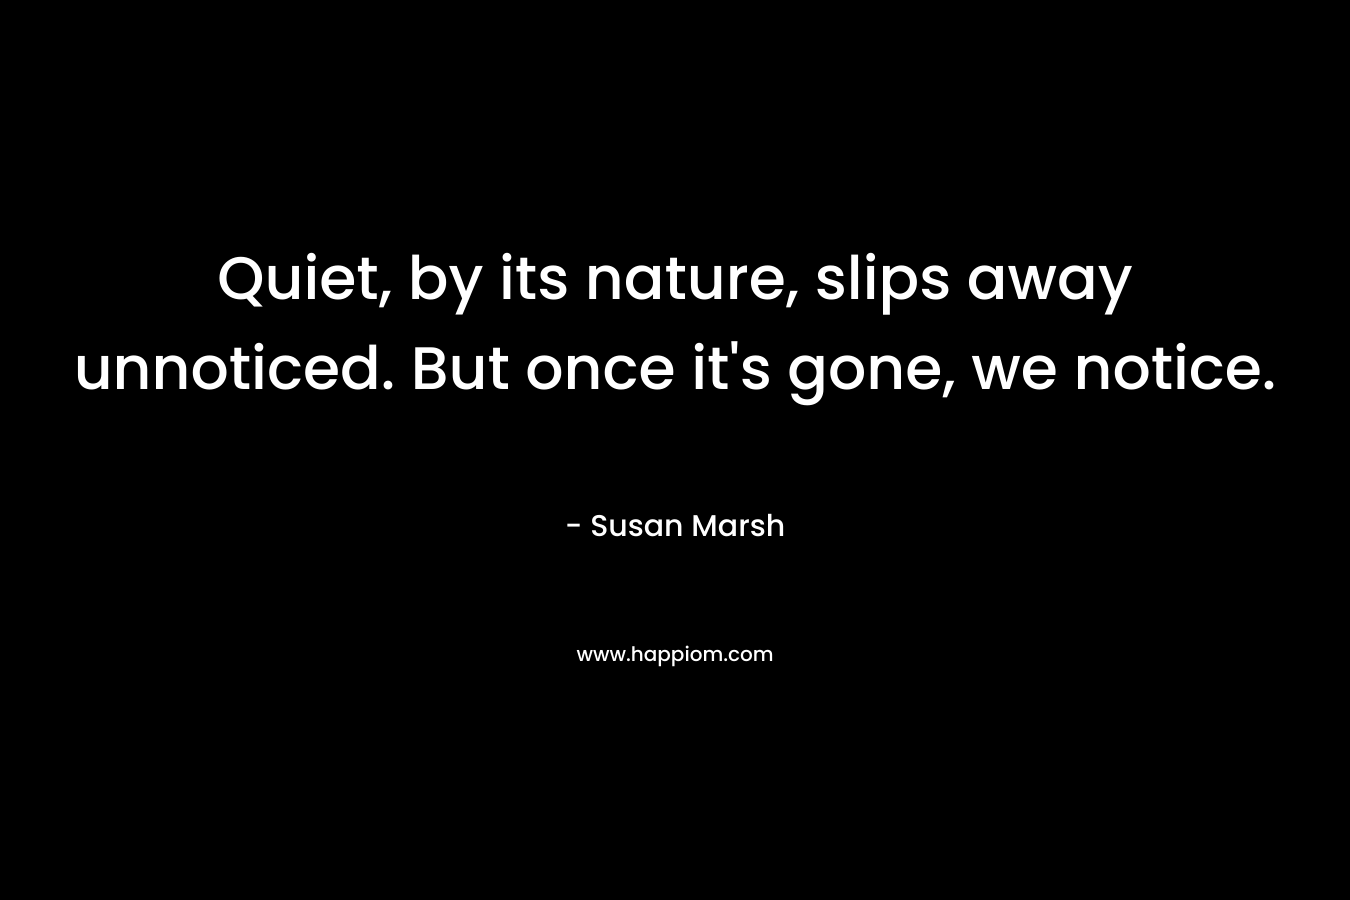 Quiet, by its nature, slips away unnoticed. But once it's gone, we notice.